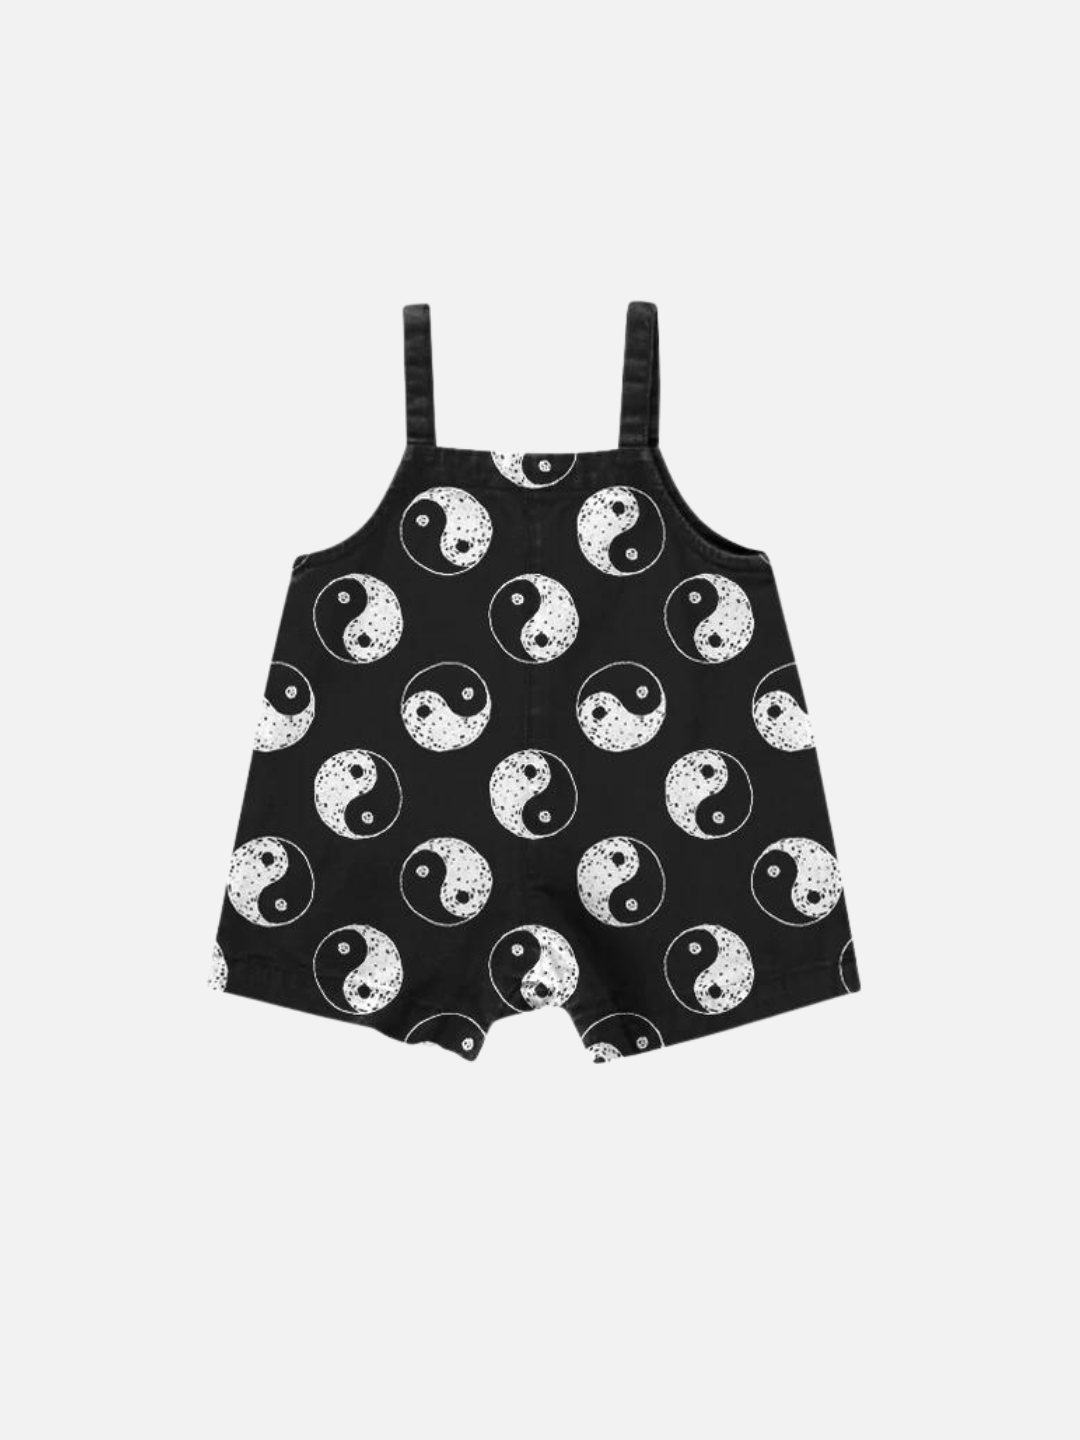 A front view of black overalls with a yin and yang pattern all over.